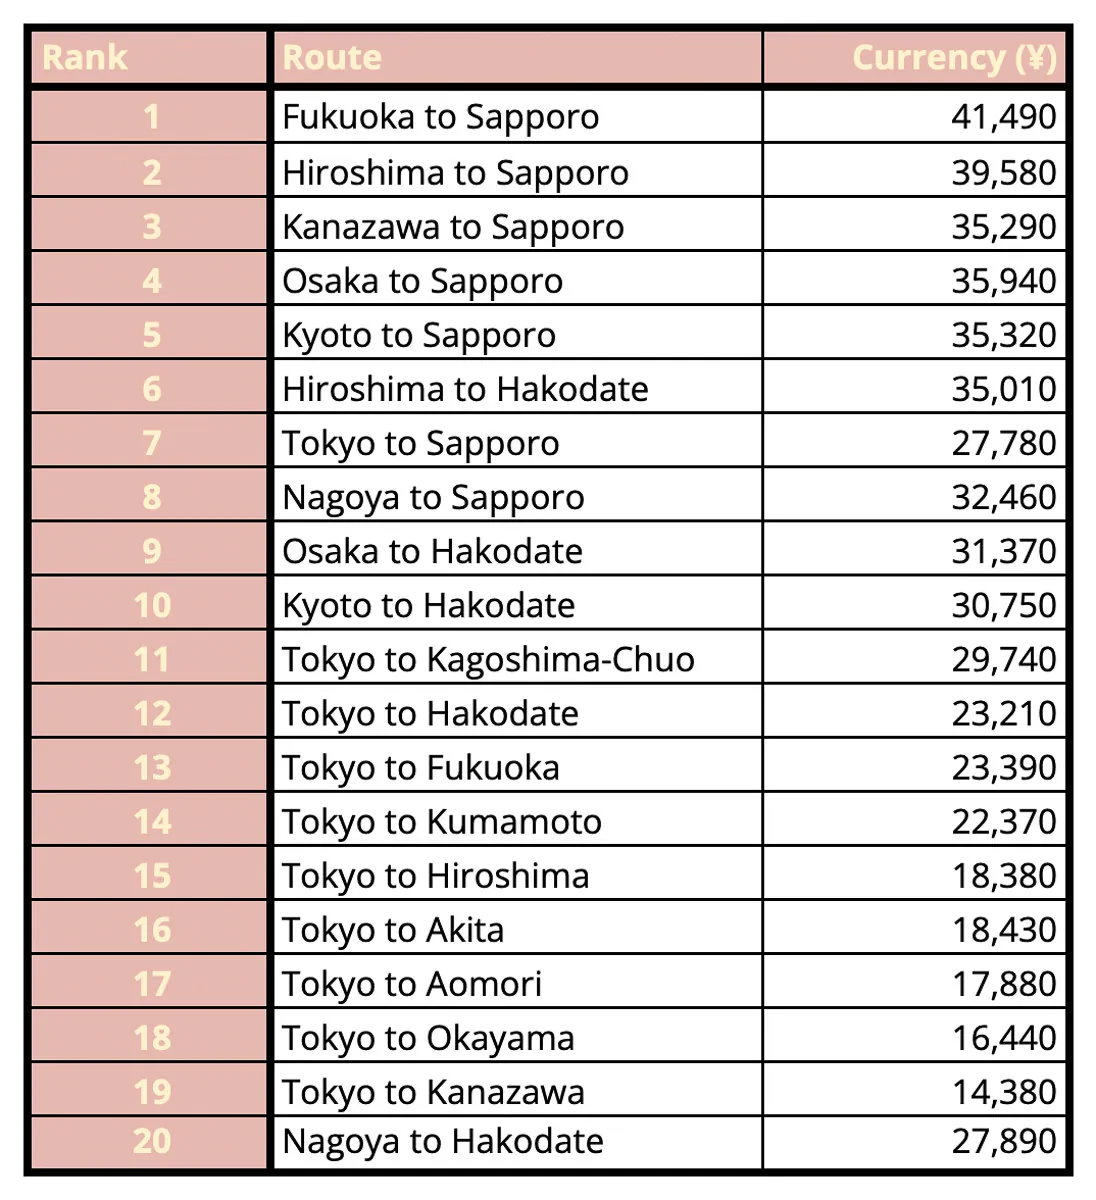 Chart of most expensive Shinkansen routes in Japan